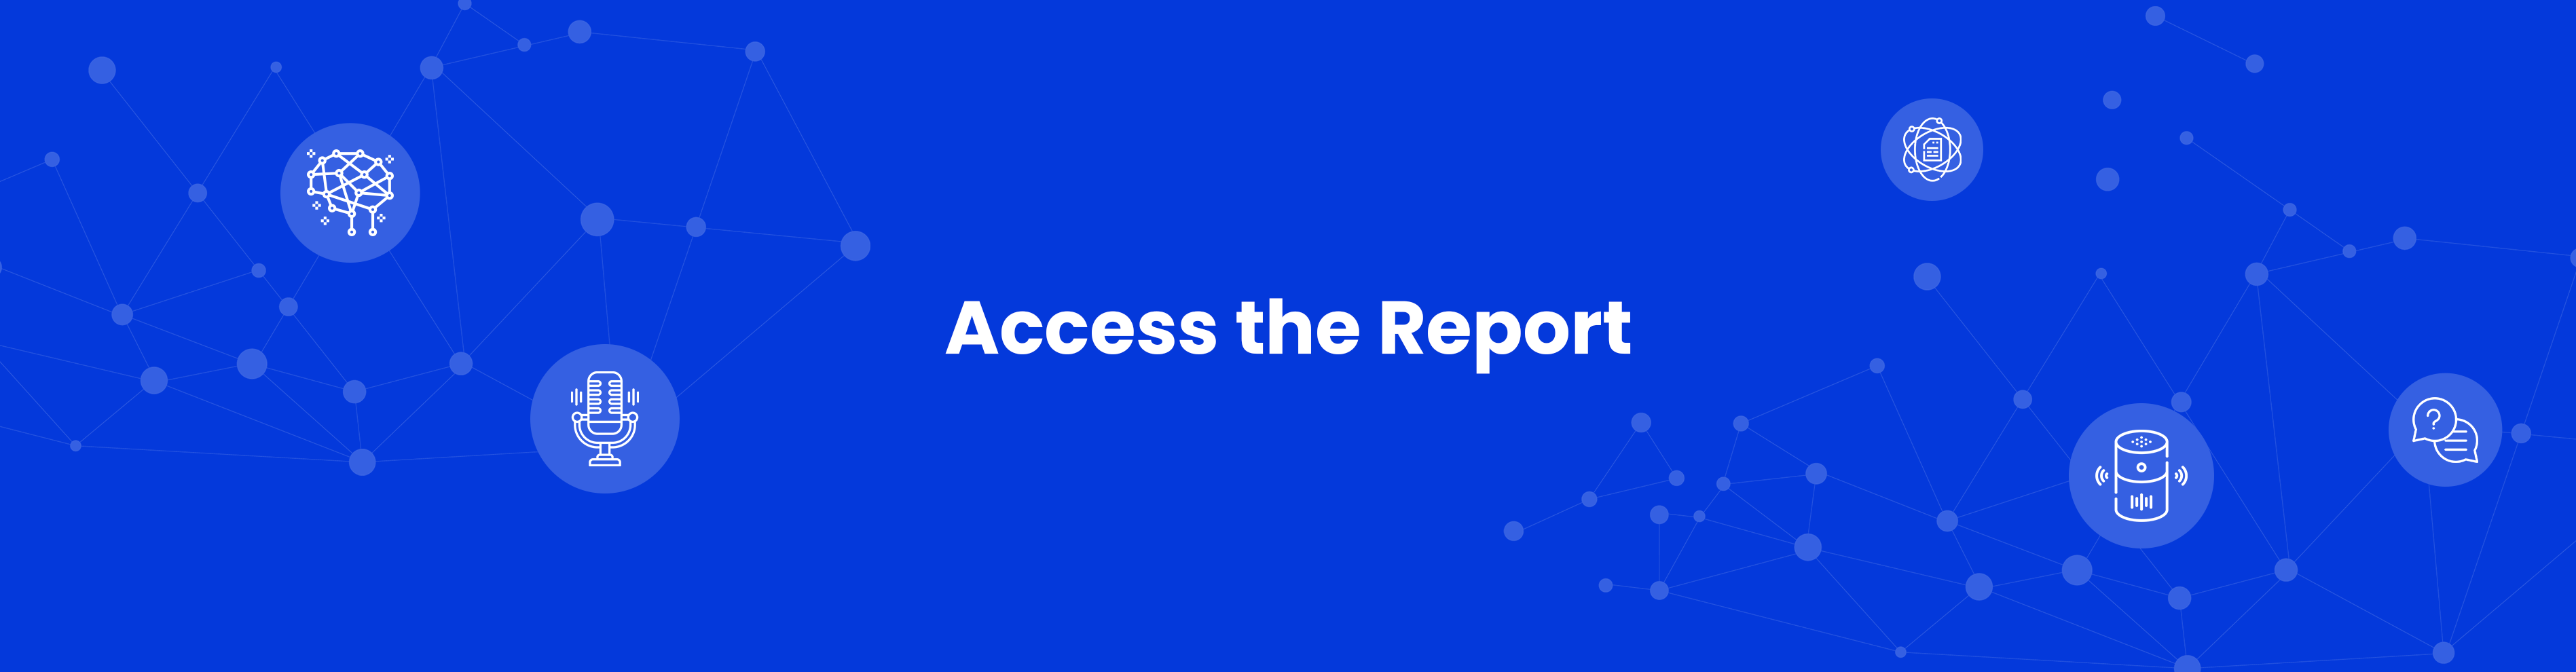 Access-the-Report-Banner